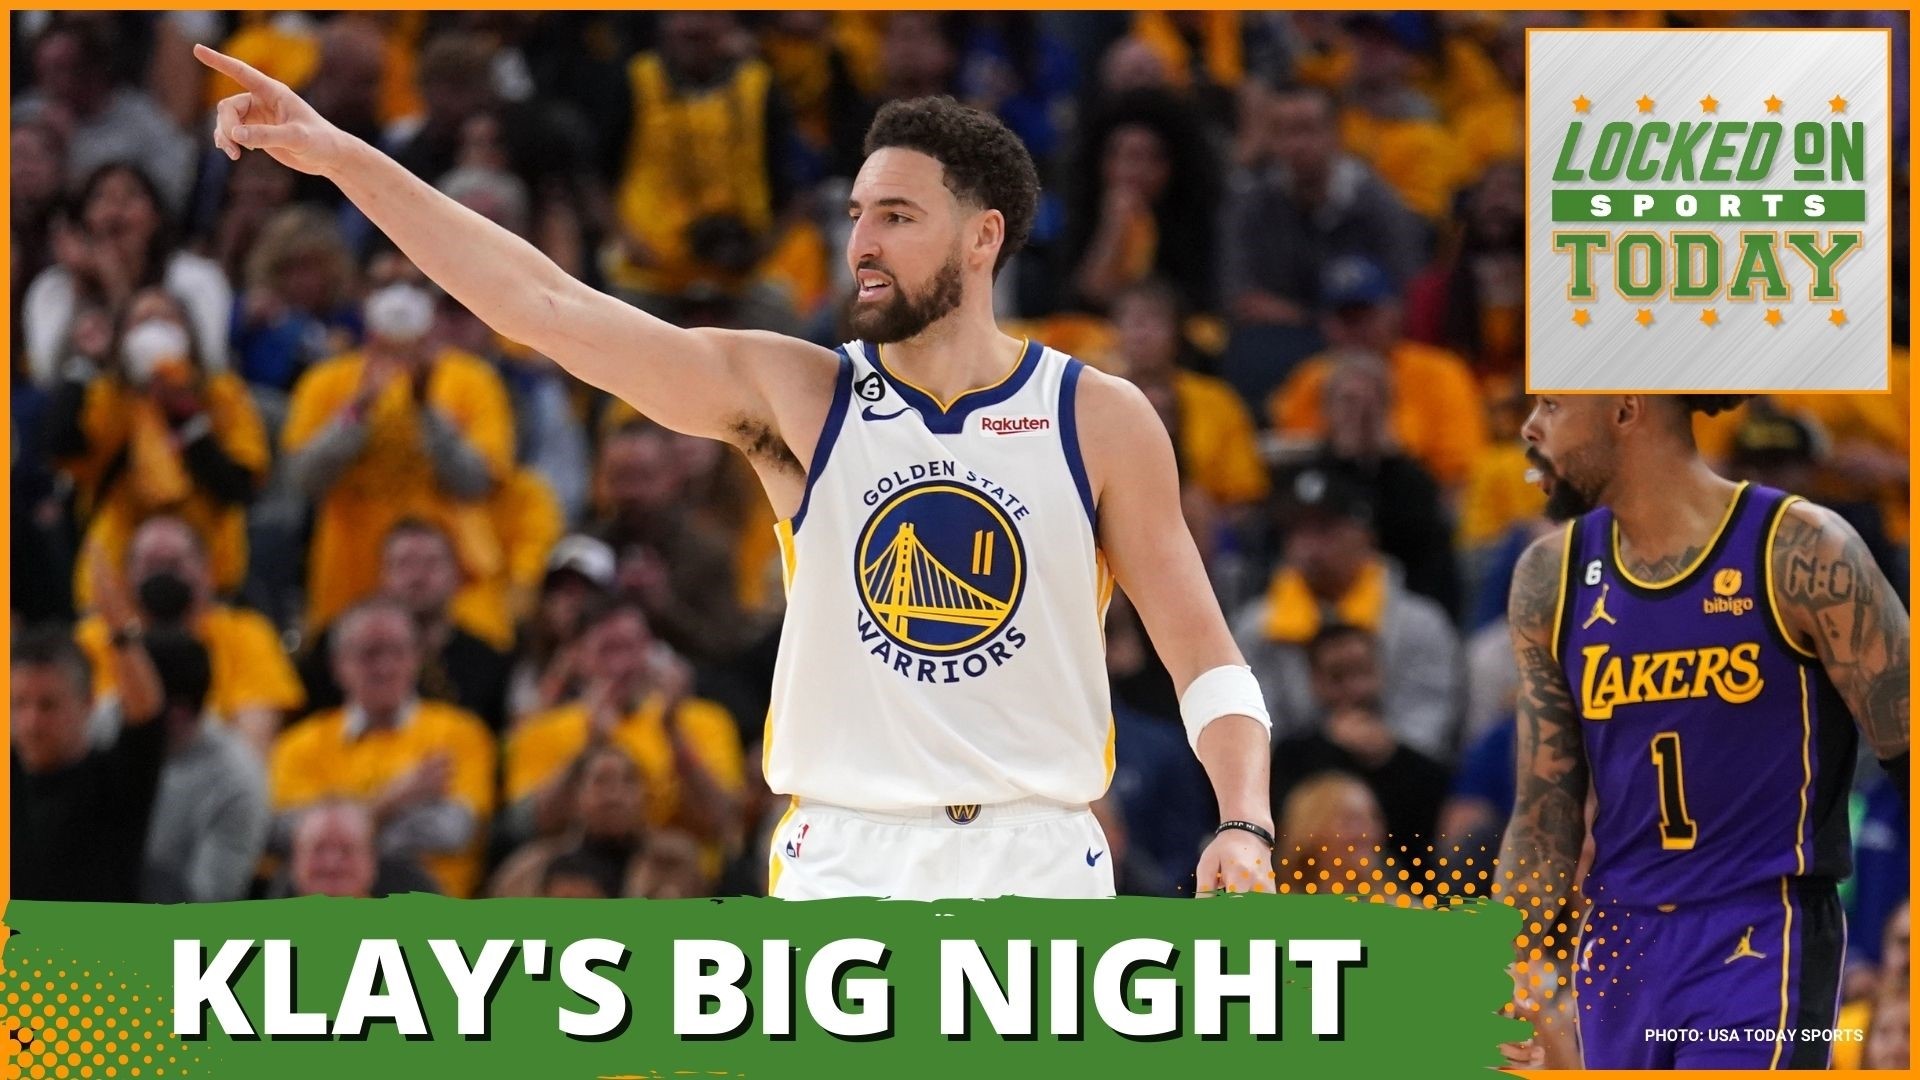 Discussing the day's top sports stories from Klay Thompson helping even the series for the Warriors to what to watch for in this year's Kentucky Derby.